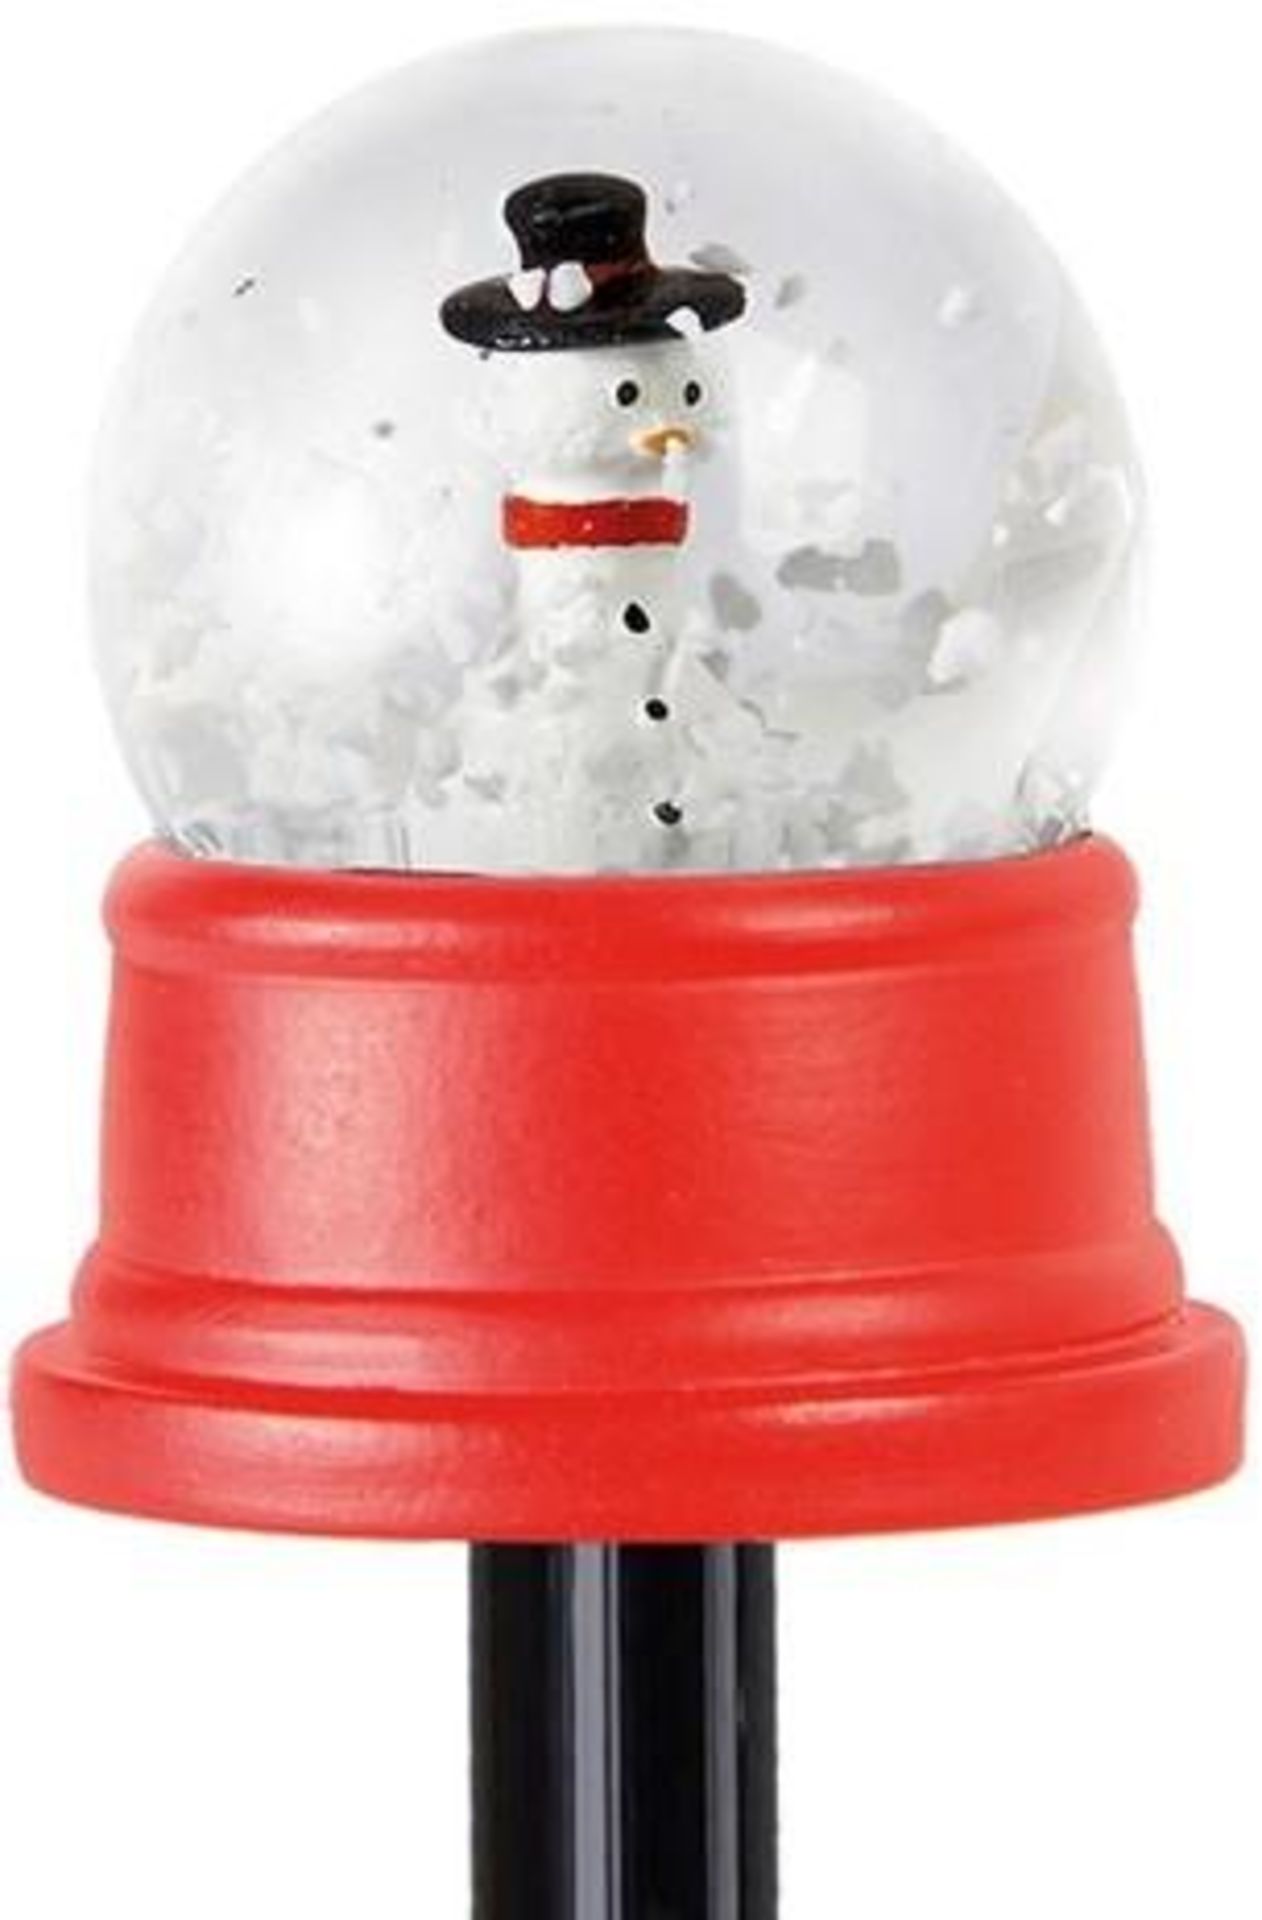 20 x ICE London Christmas Snow Globe Pens - Brand New Sealed Stock - Ideal Stocking Fillers With Exc - Image 4 of 4